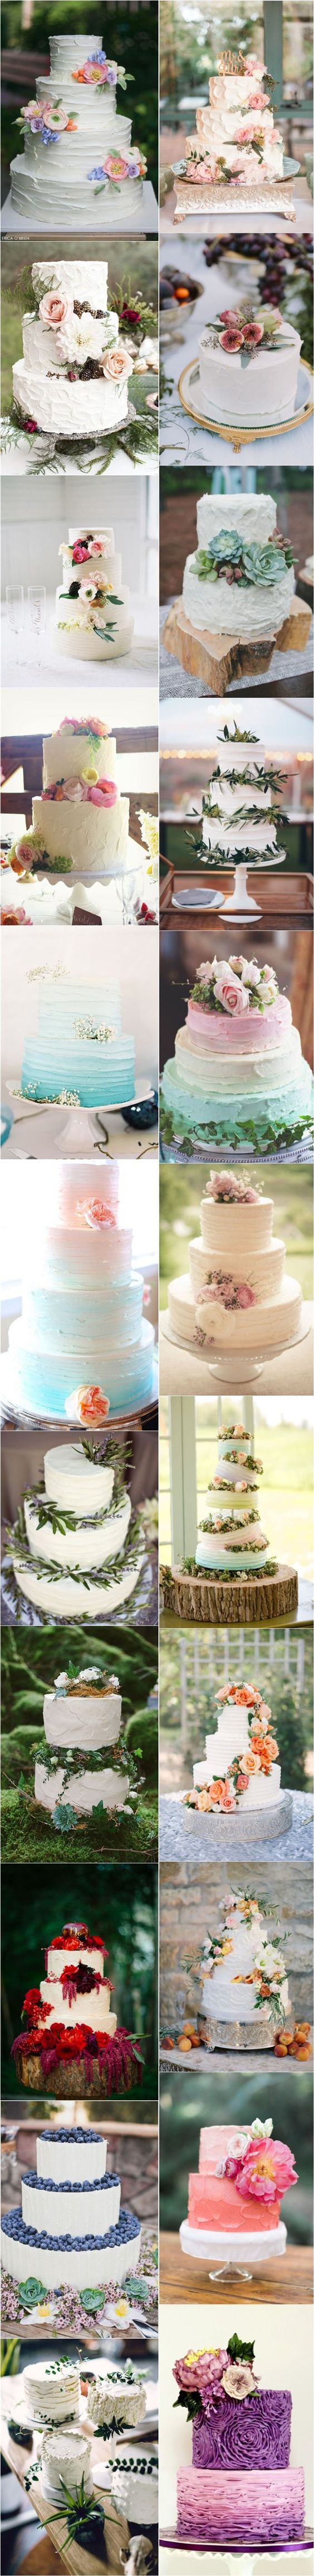 Buttercream wedding cakes. Elegance and texture!!